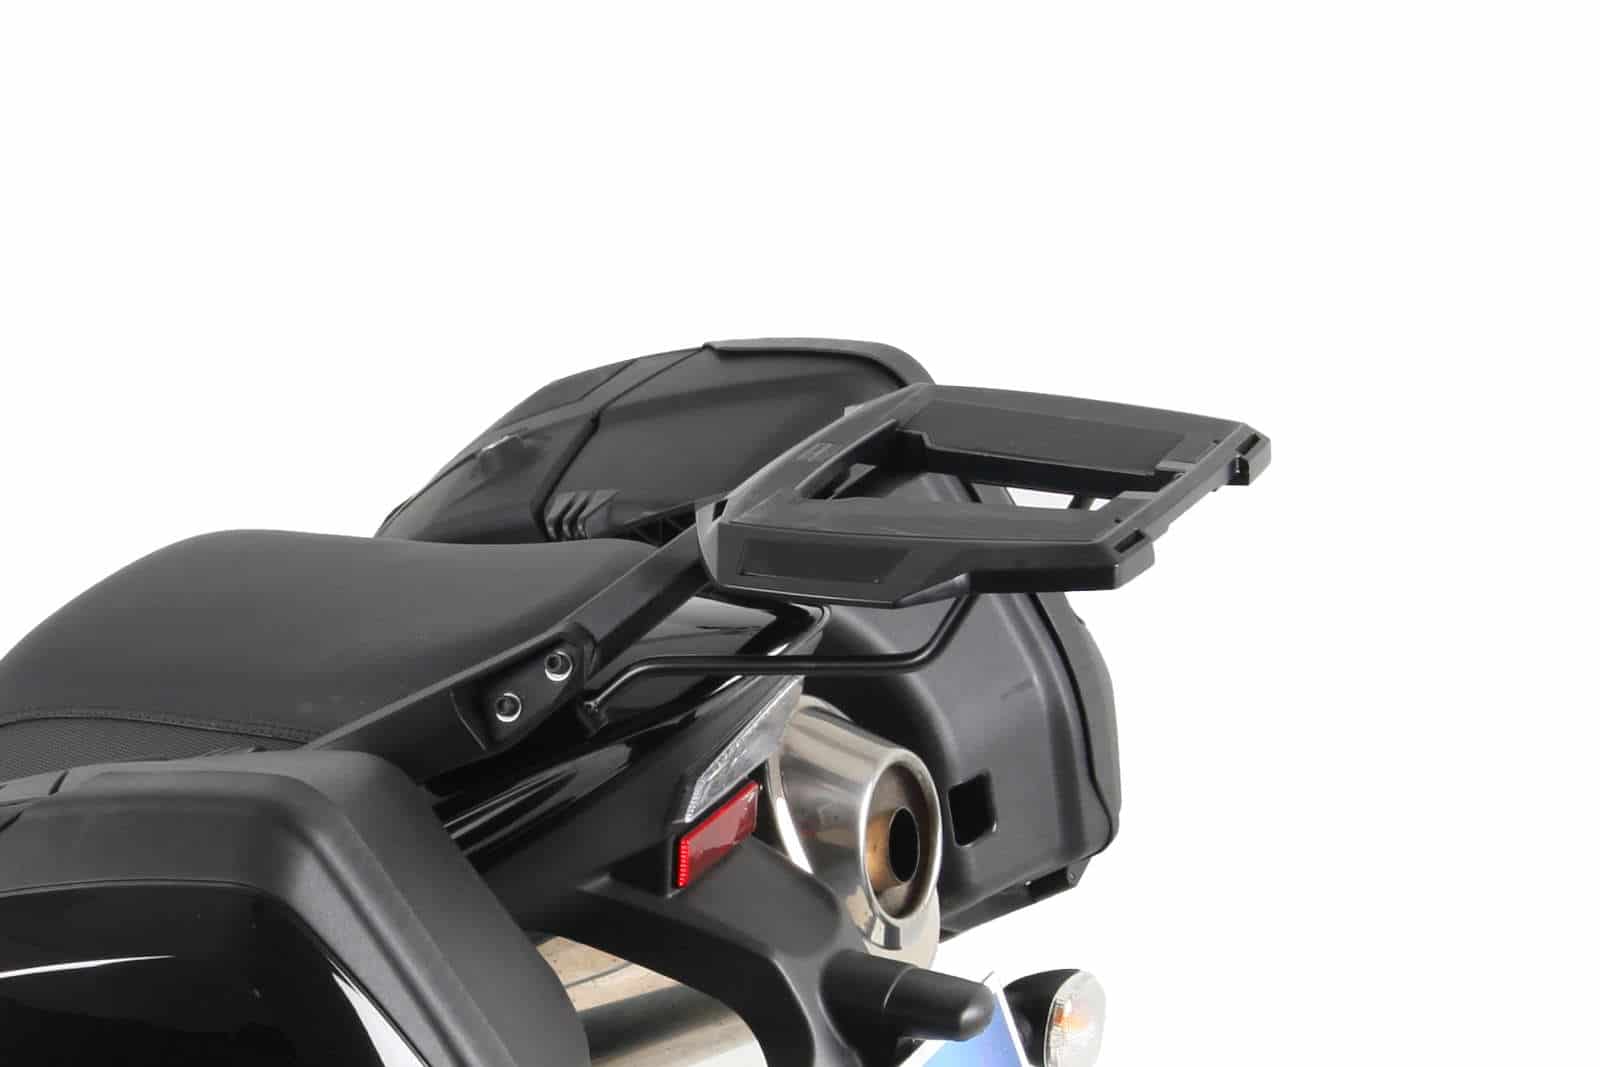 Alurack topcasecarrier black for Triumph Tiger 1050 (2007-2013) in combination with Triumph sidecase carrier